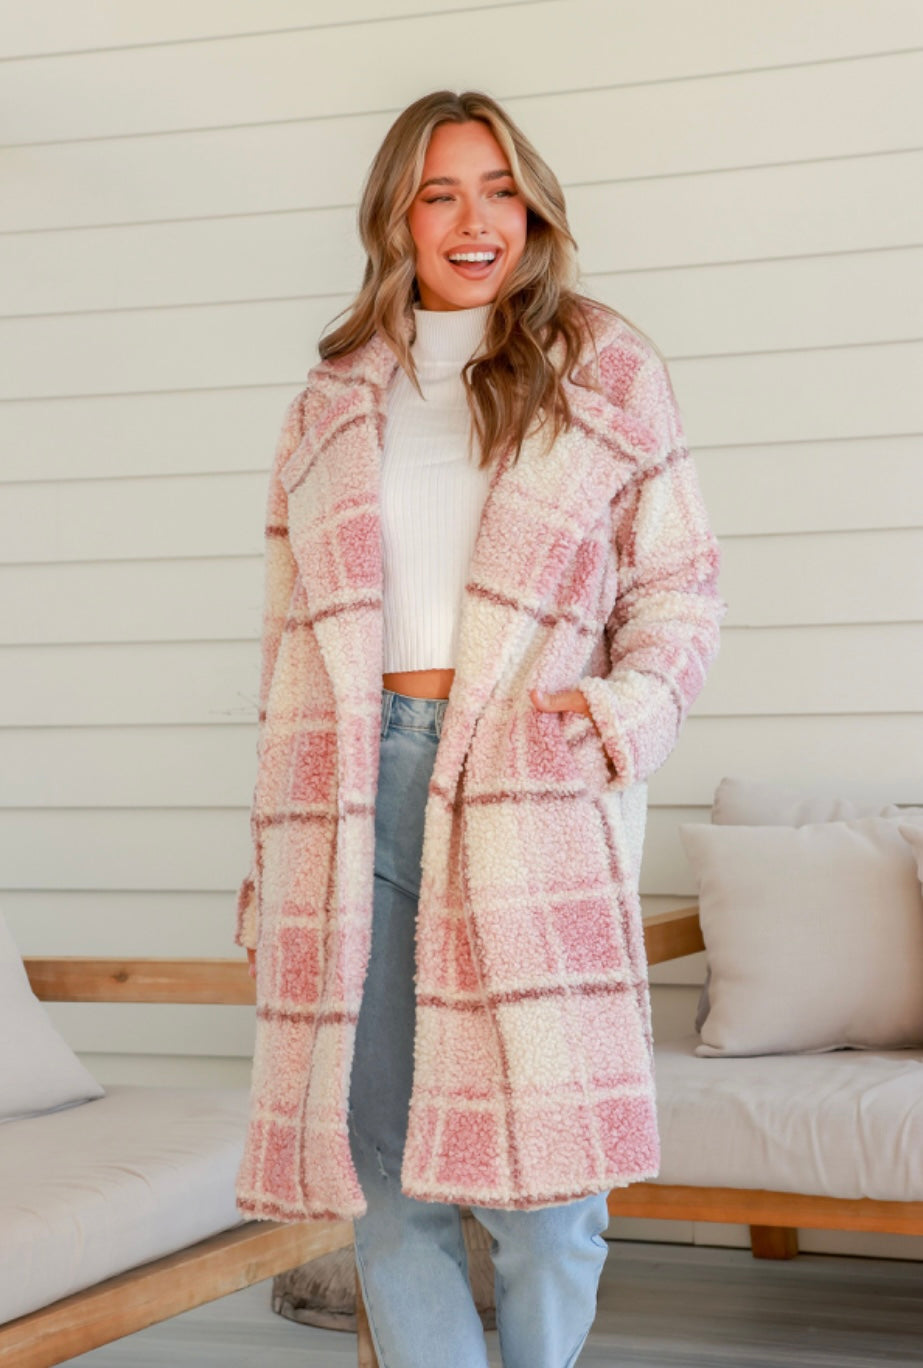 Parisian Dream Check Coat in Pink and White